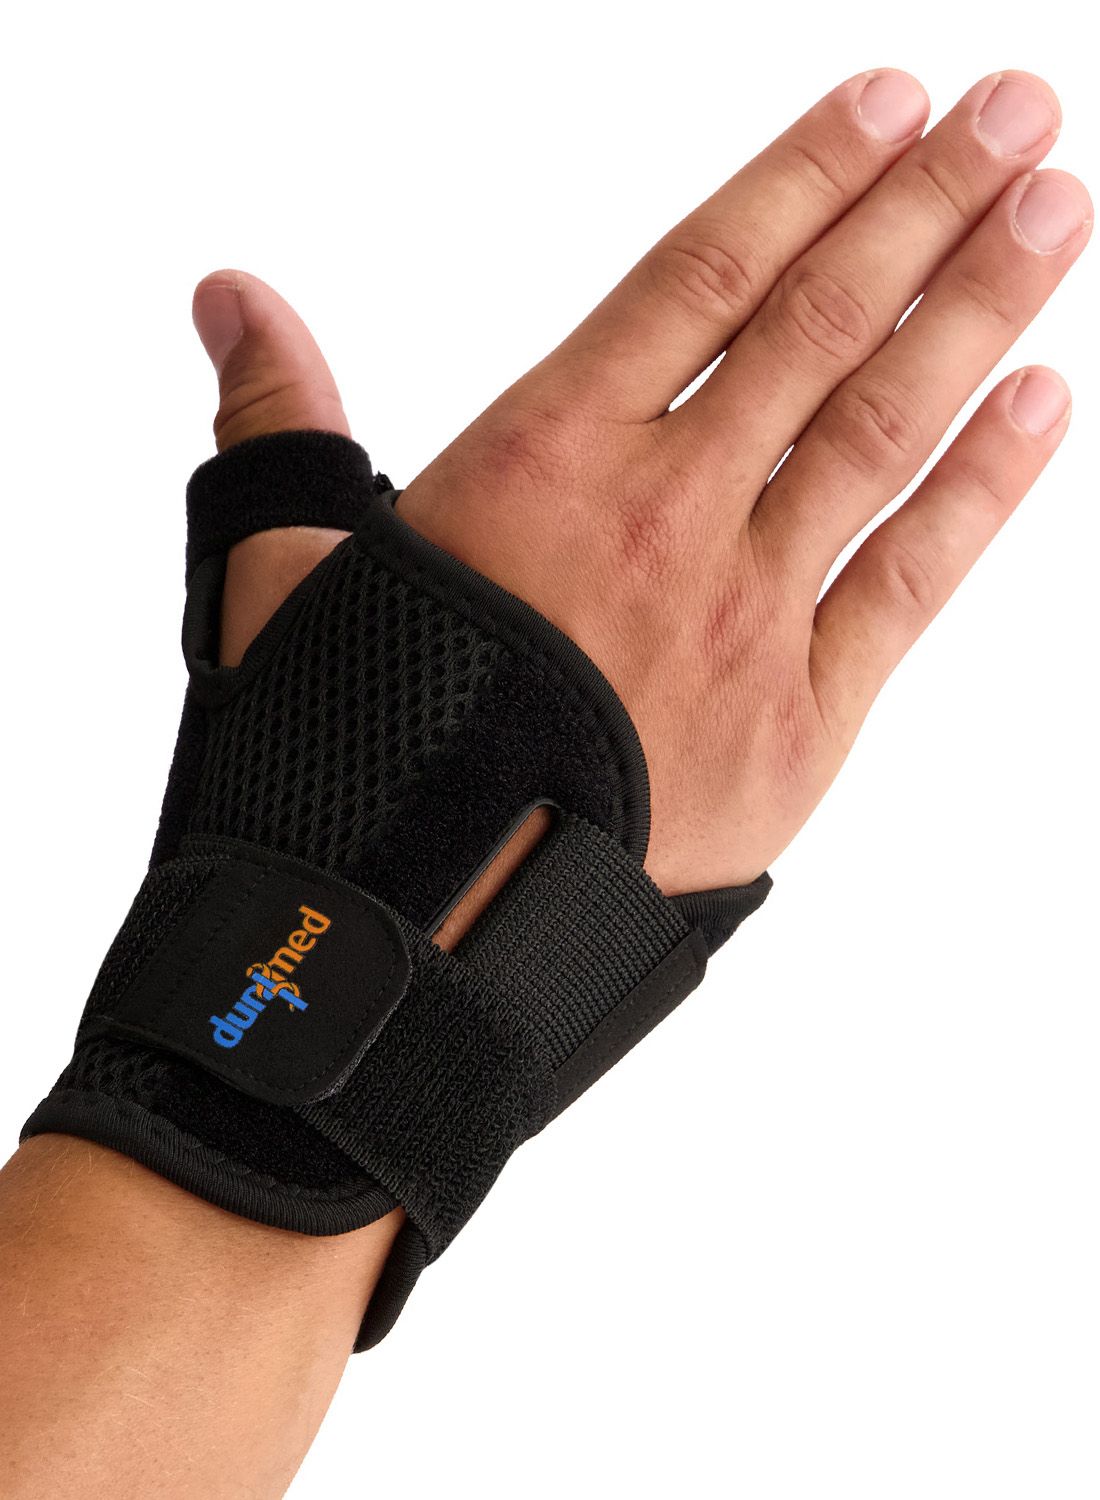 dunimed premium thumb wrist support for sale